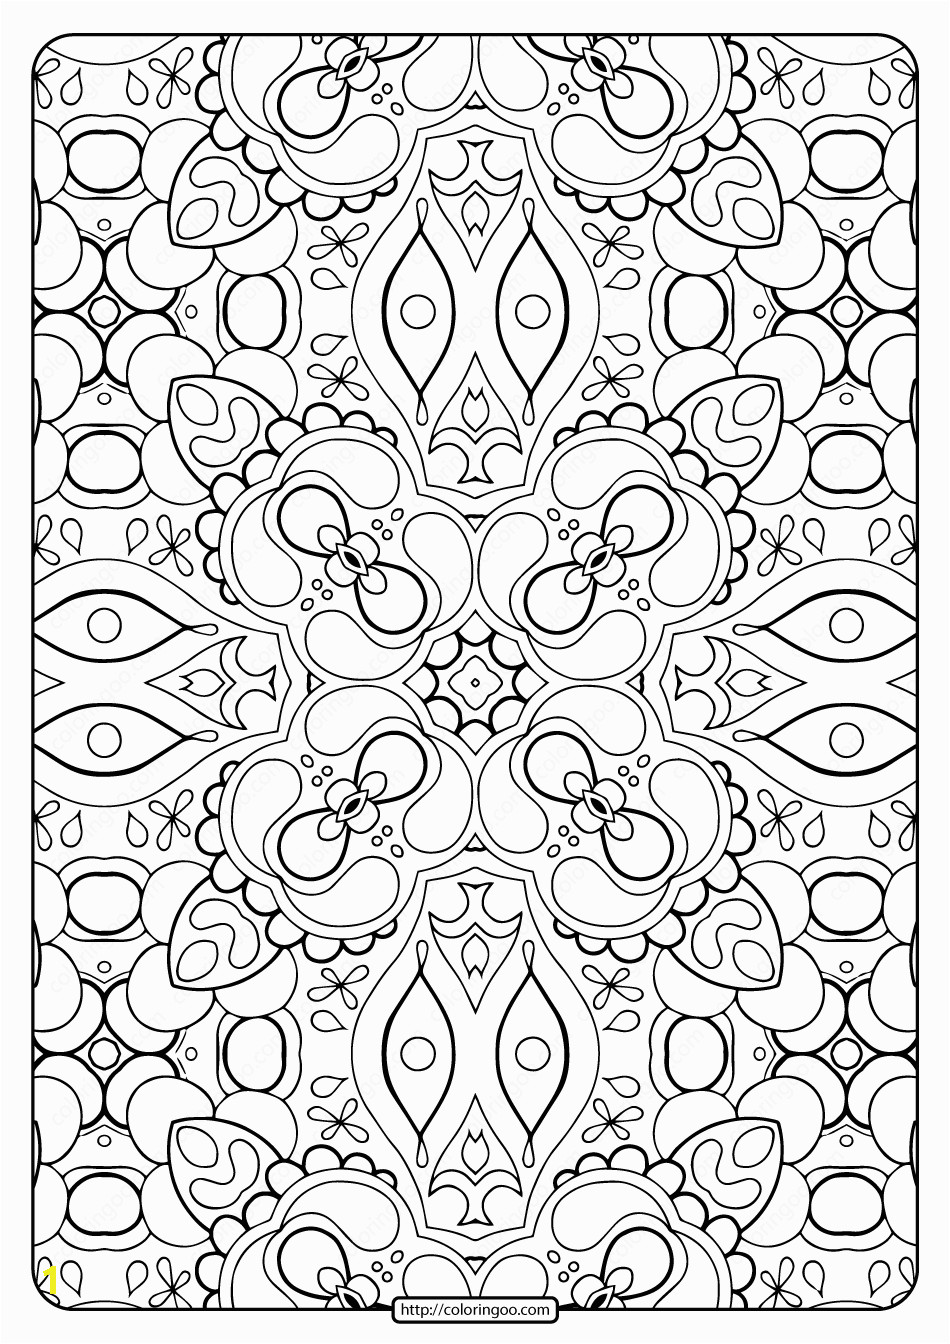 printable abstract pattern adult coloring pages 01